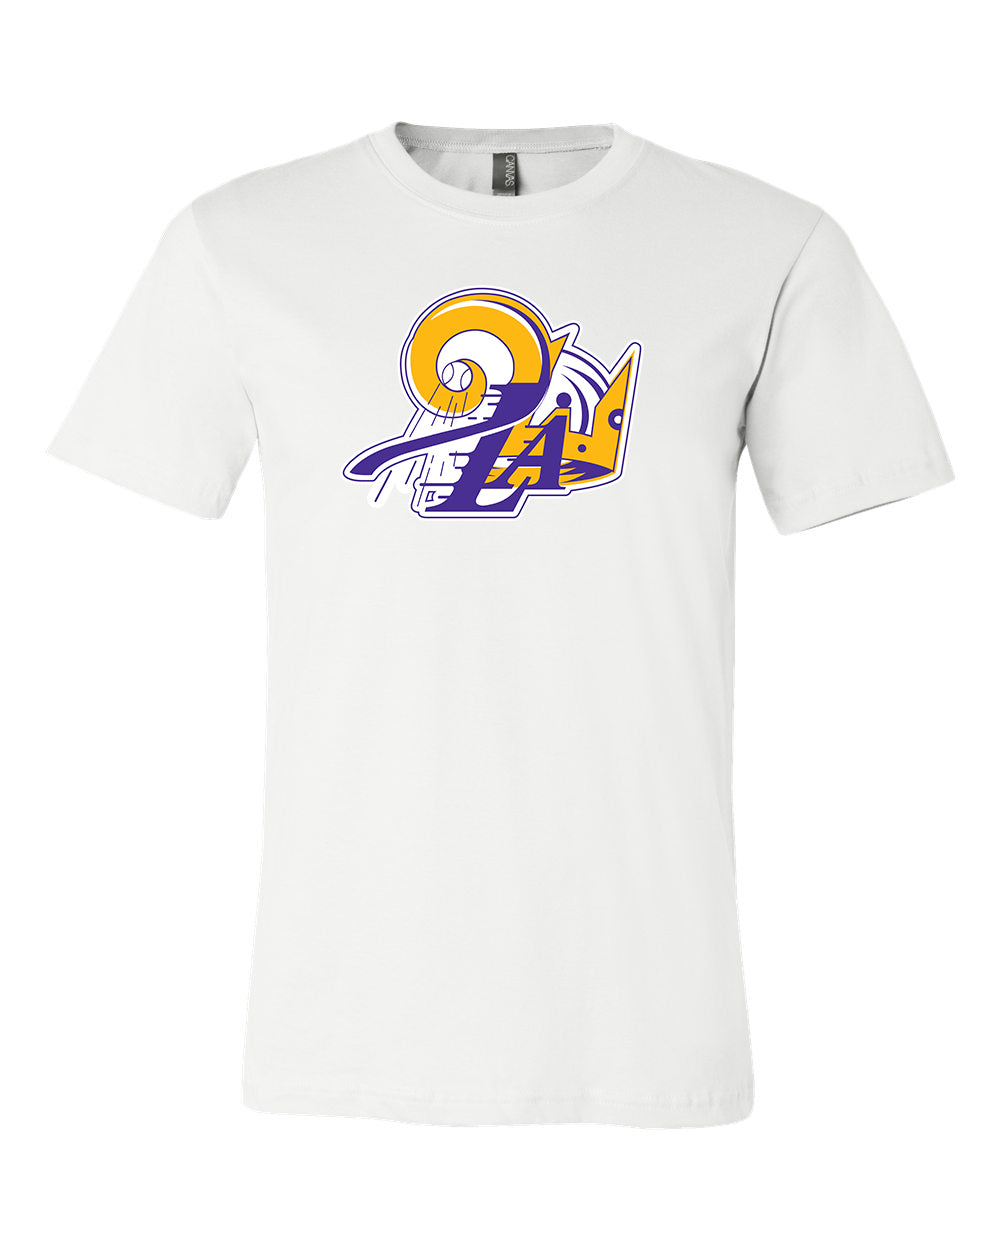 Los Angeles Lakers Dodgers Kings MASH UP Logo T-shirt 6 Sizes S